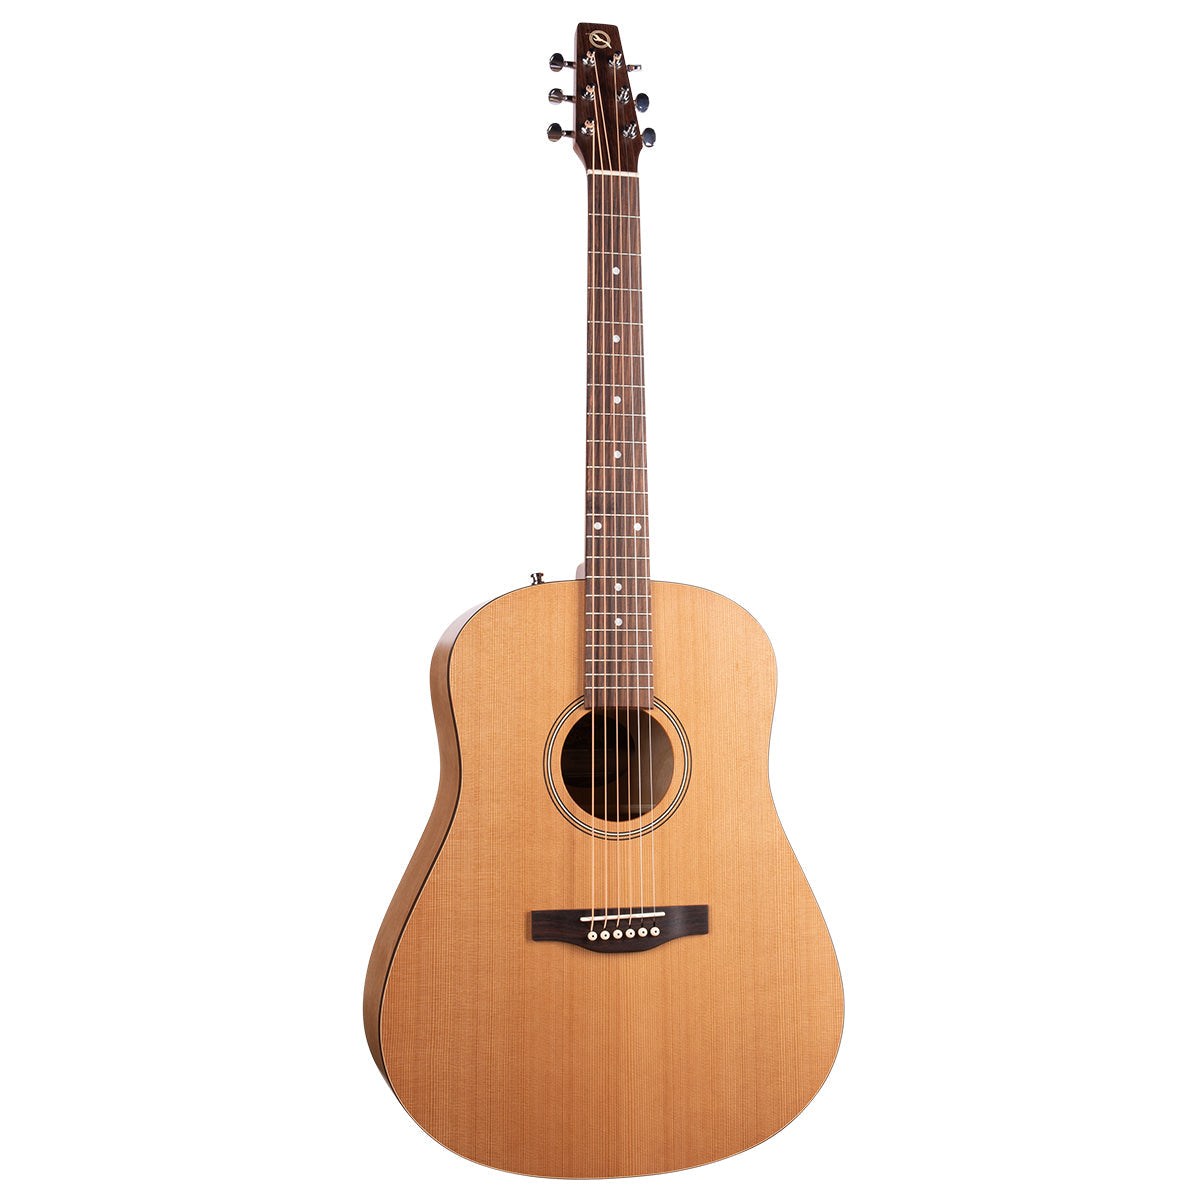 Seagull S6 1982 Collection Acoustic Guitar ~ Natural, Acoustic Guitar for sale at Richards Guitars.